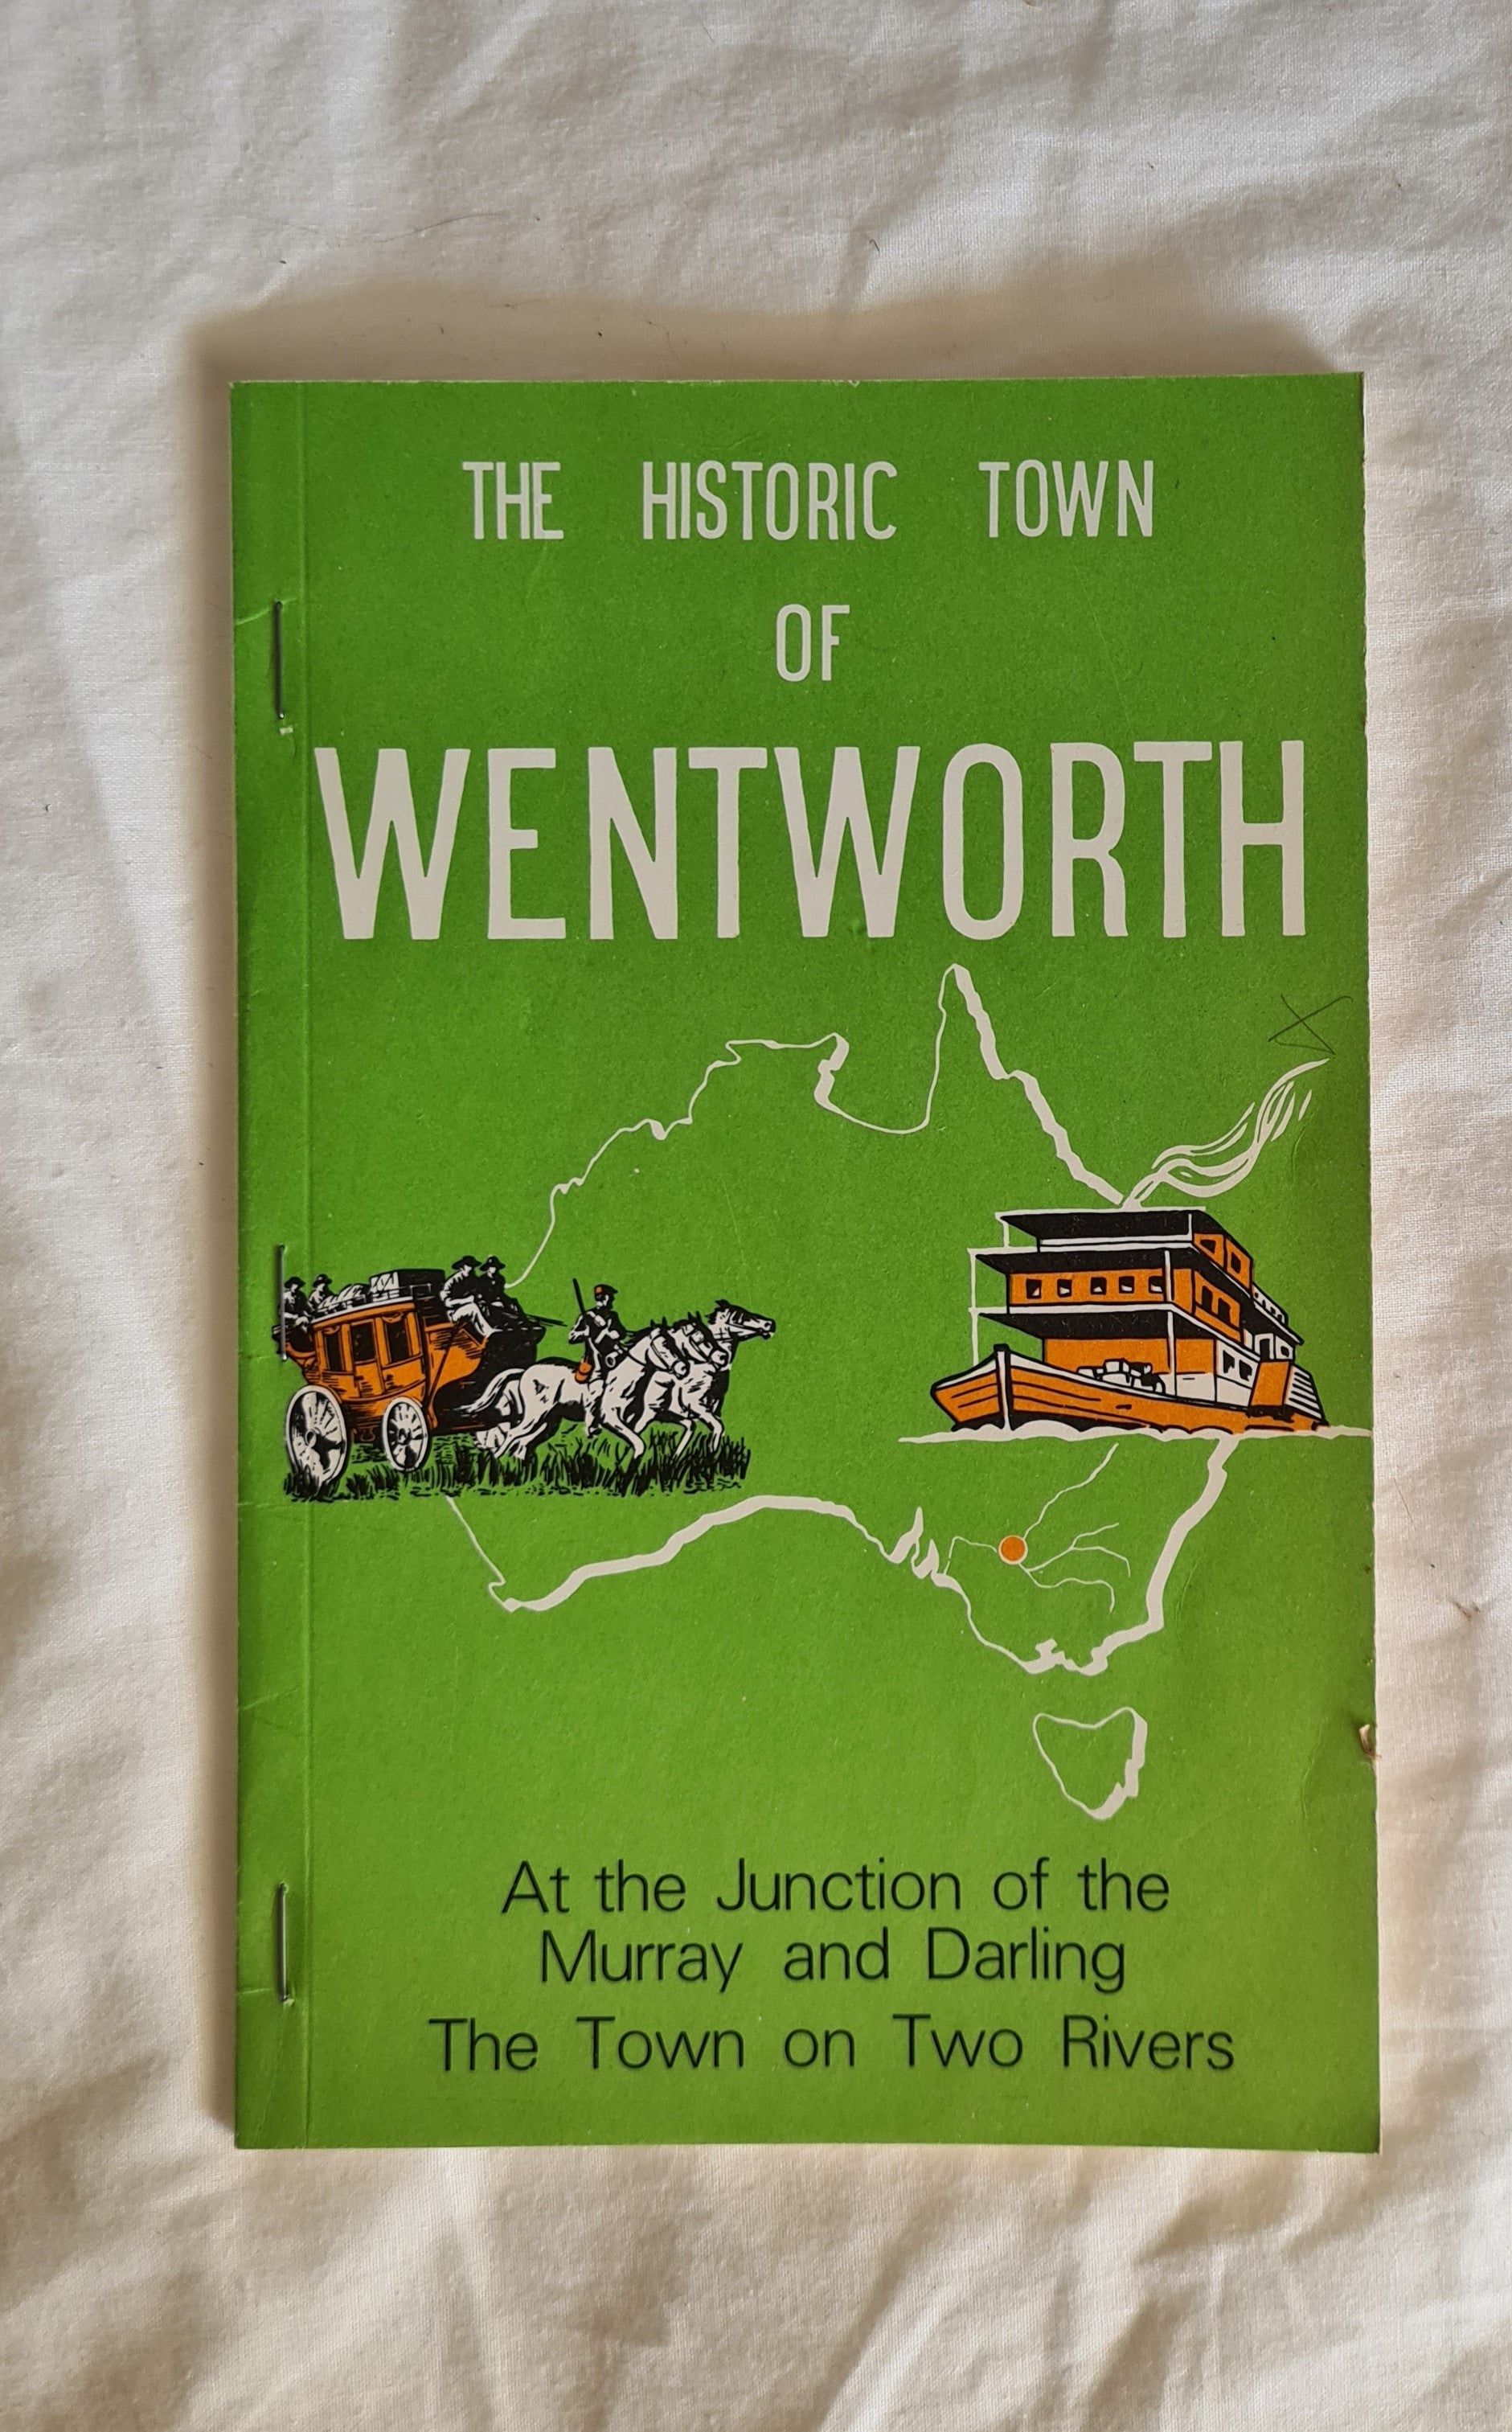 The Historic Town of Wentworth  At the Junction of the Murray and Darling the Town on Two Rivers  by David Tulloch